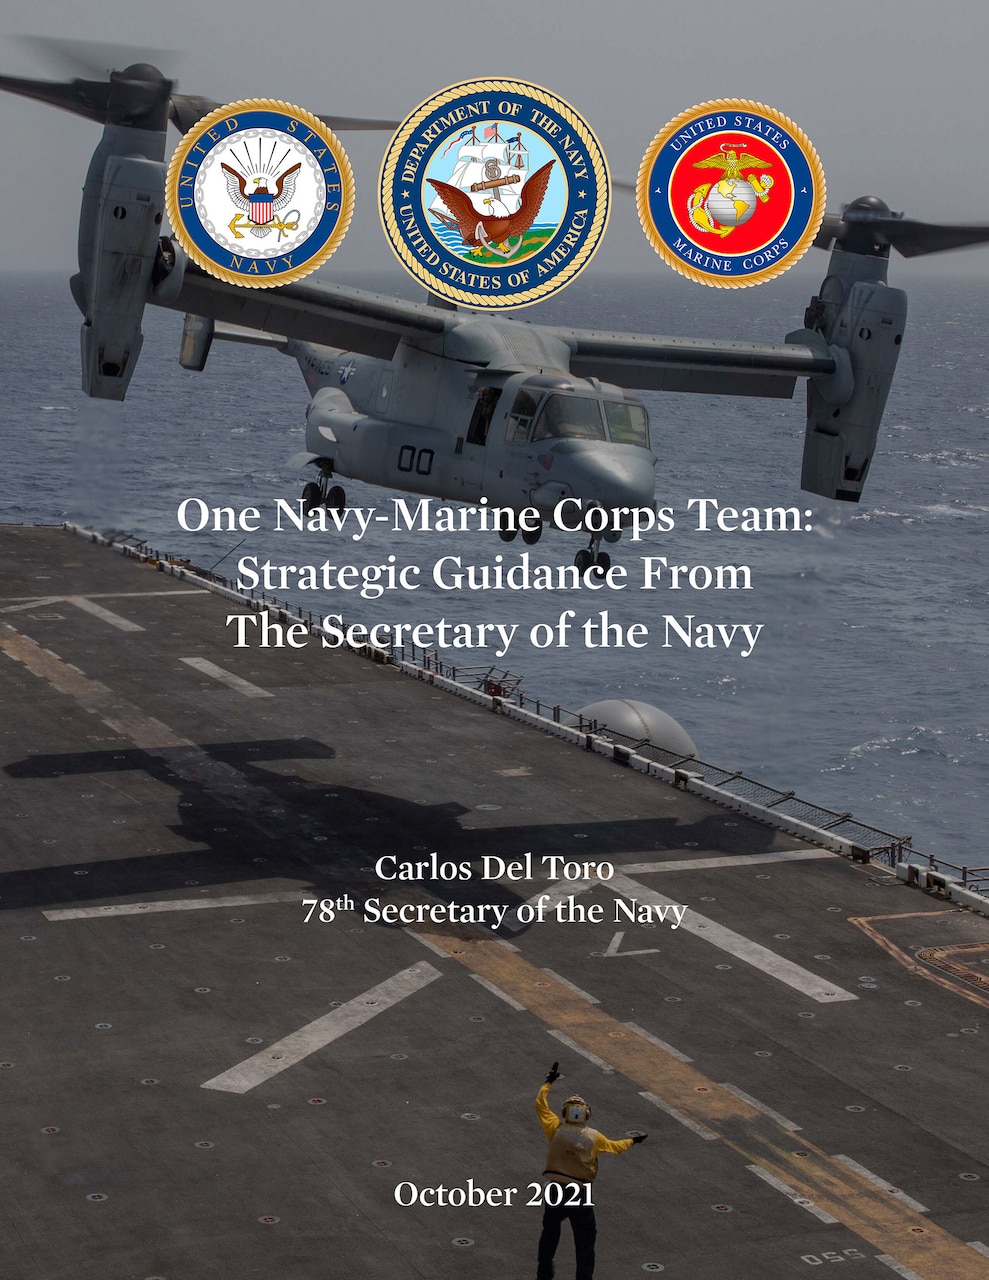 WASHINGTON (Oct. 8, 2021) Cover of released strategic guidance by Secretary of the Navy Carlos Del Toro.  (U.S. Navy graphic)